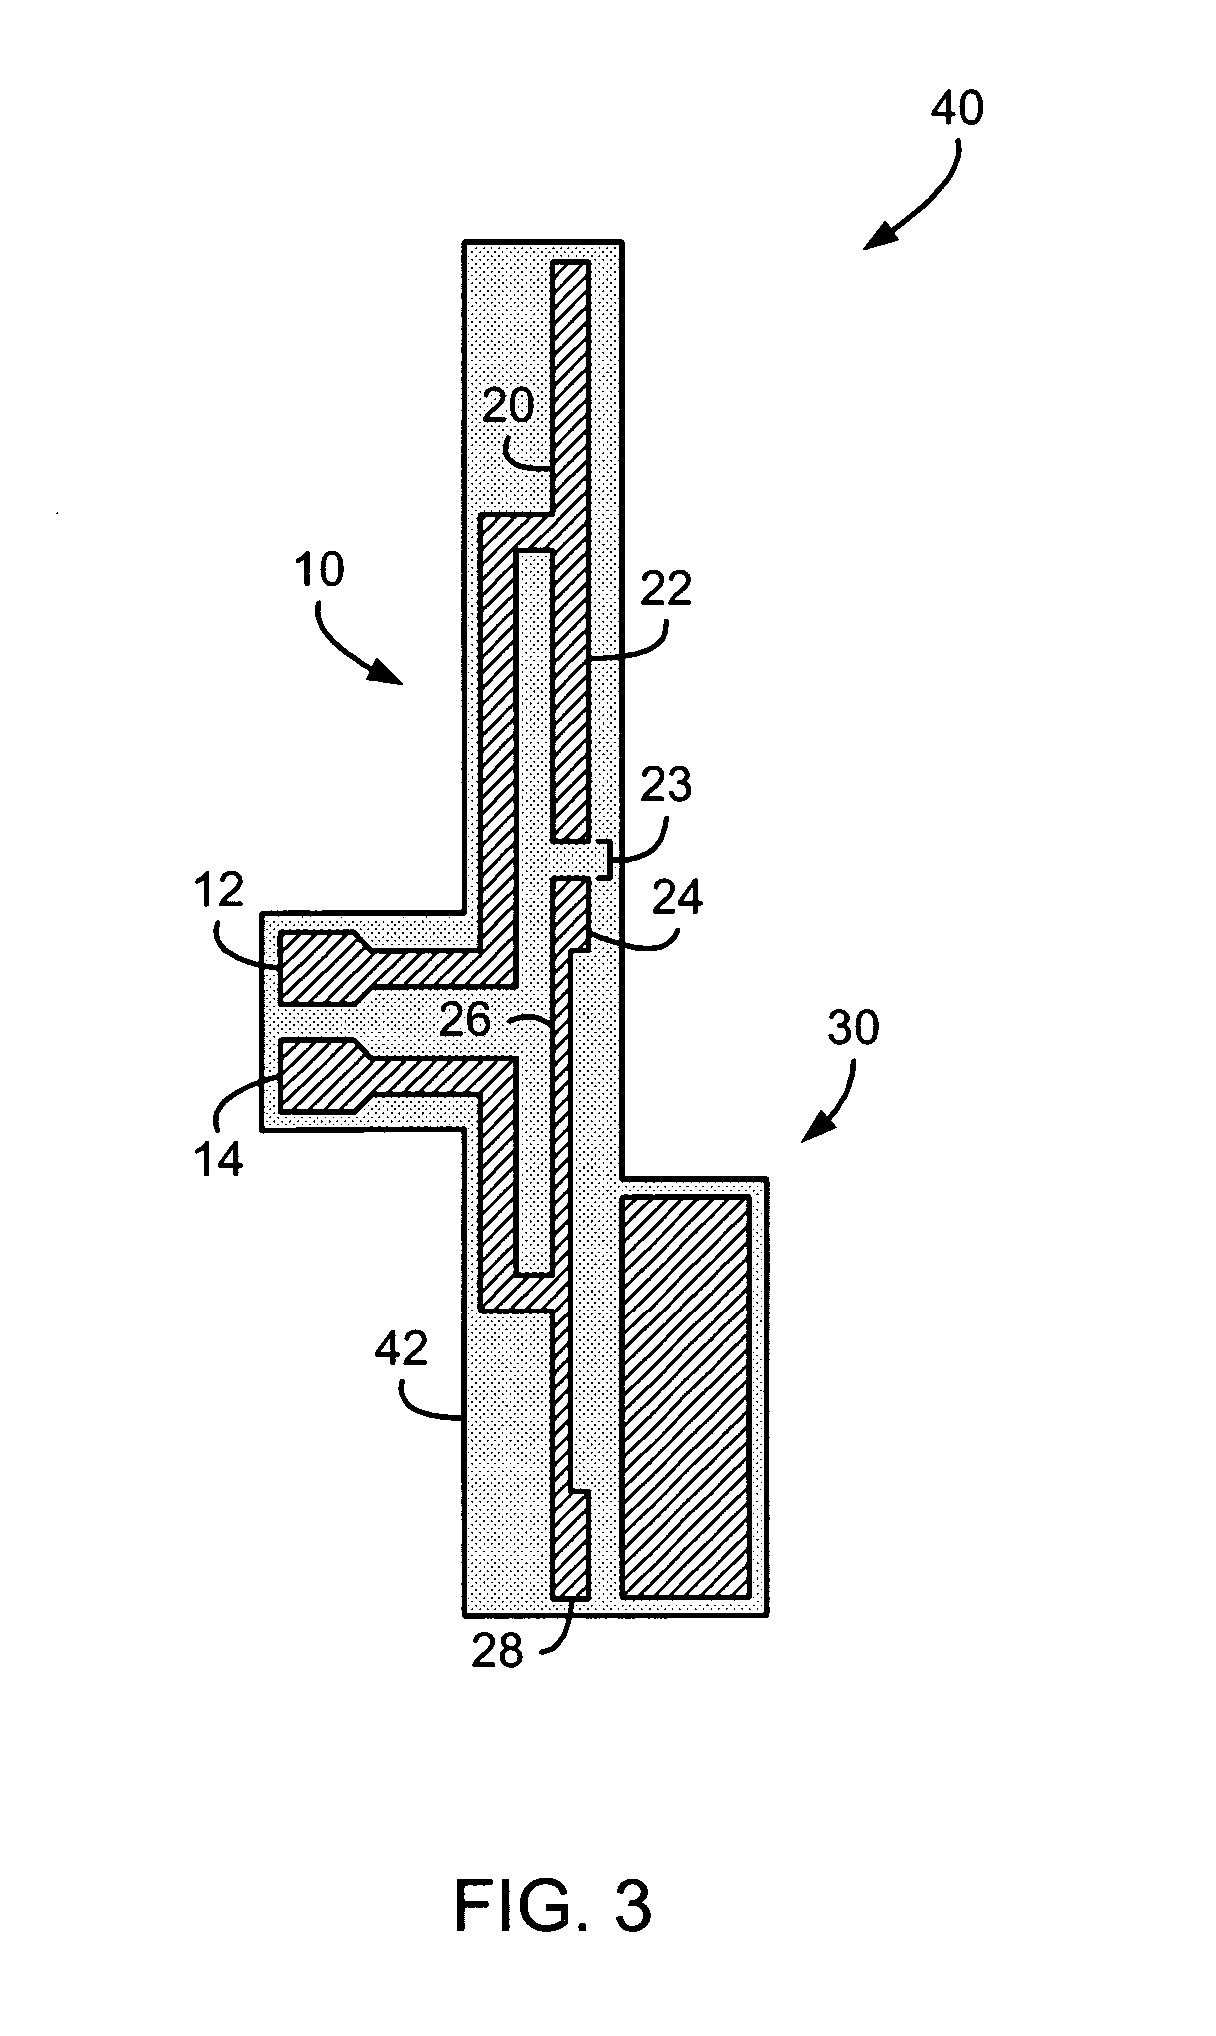 Floating conductor pad for antenna performance stabilization and noise reduction